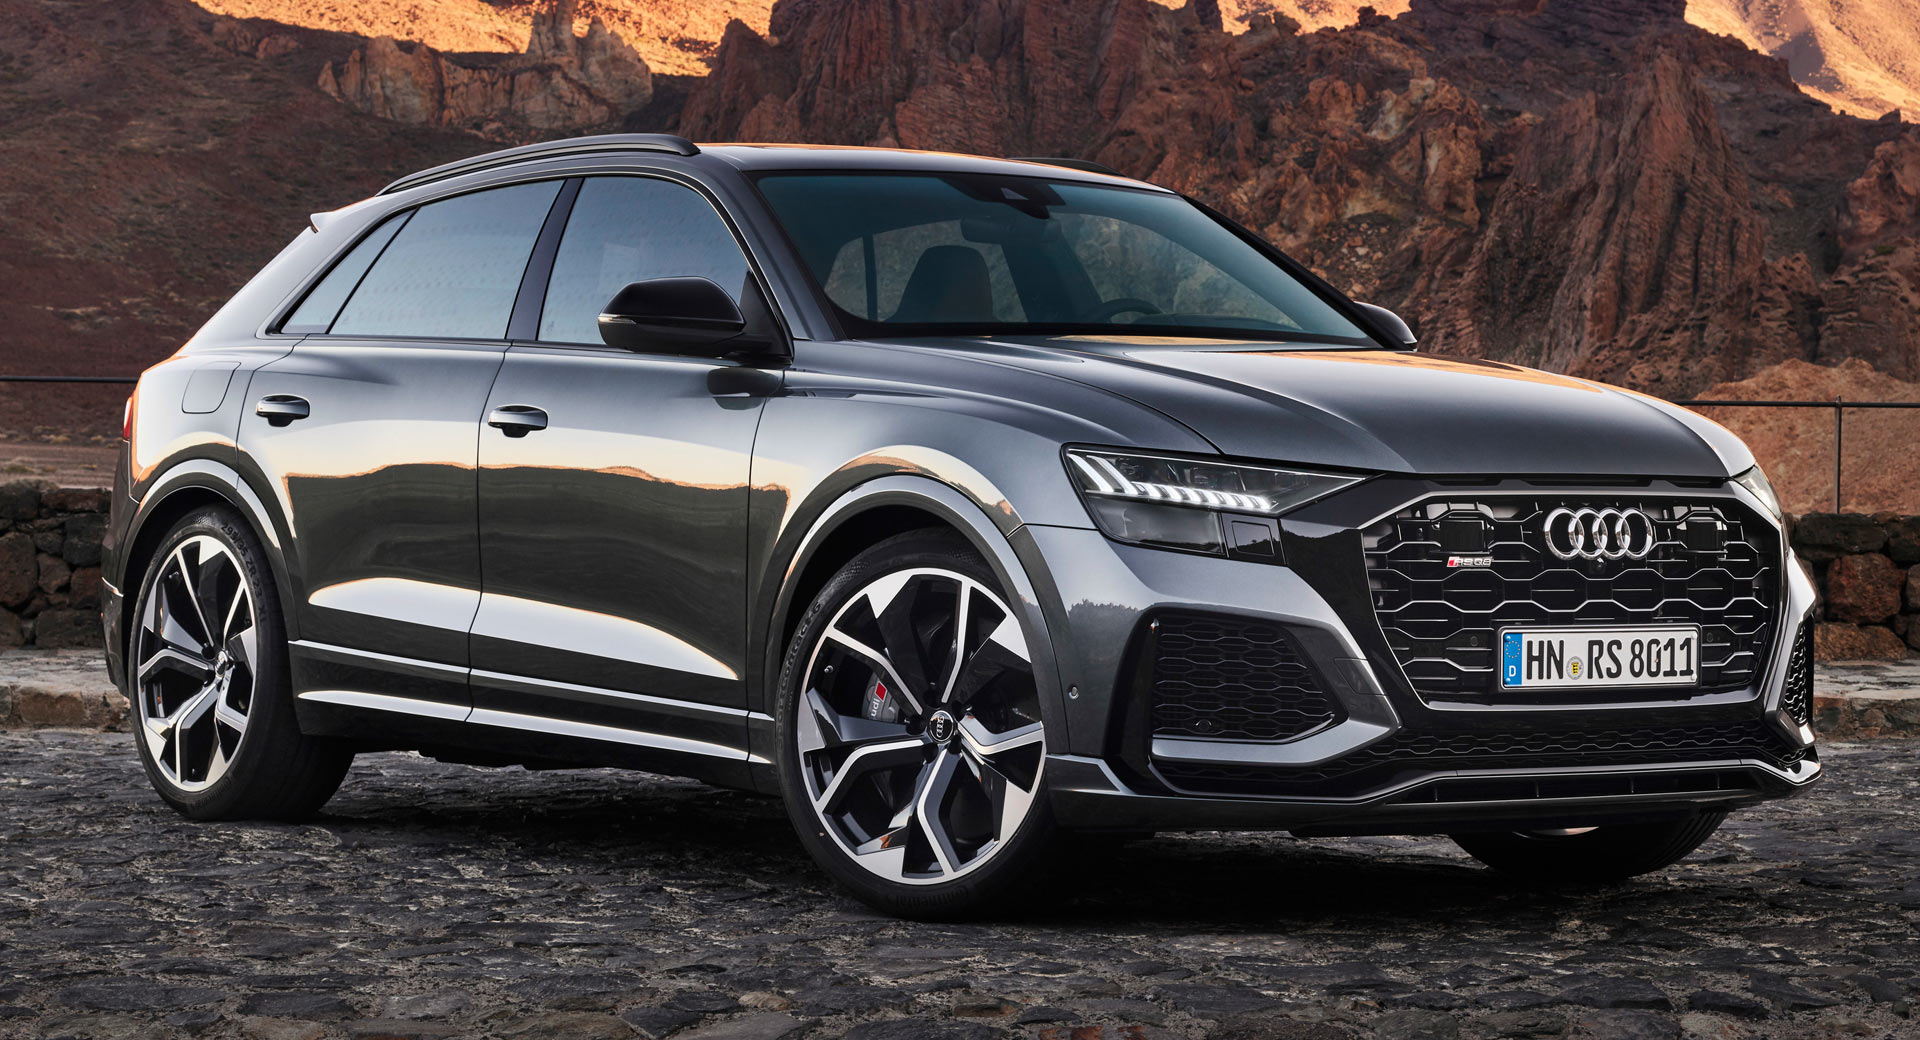 2020 Audi RS Q8 Packs 591 HP And A $113,000 Price Tag | Carscoops